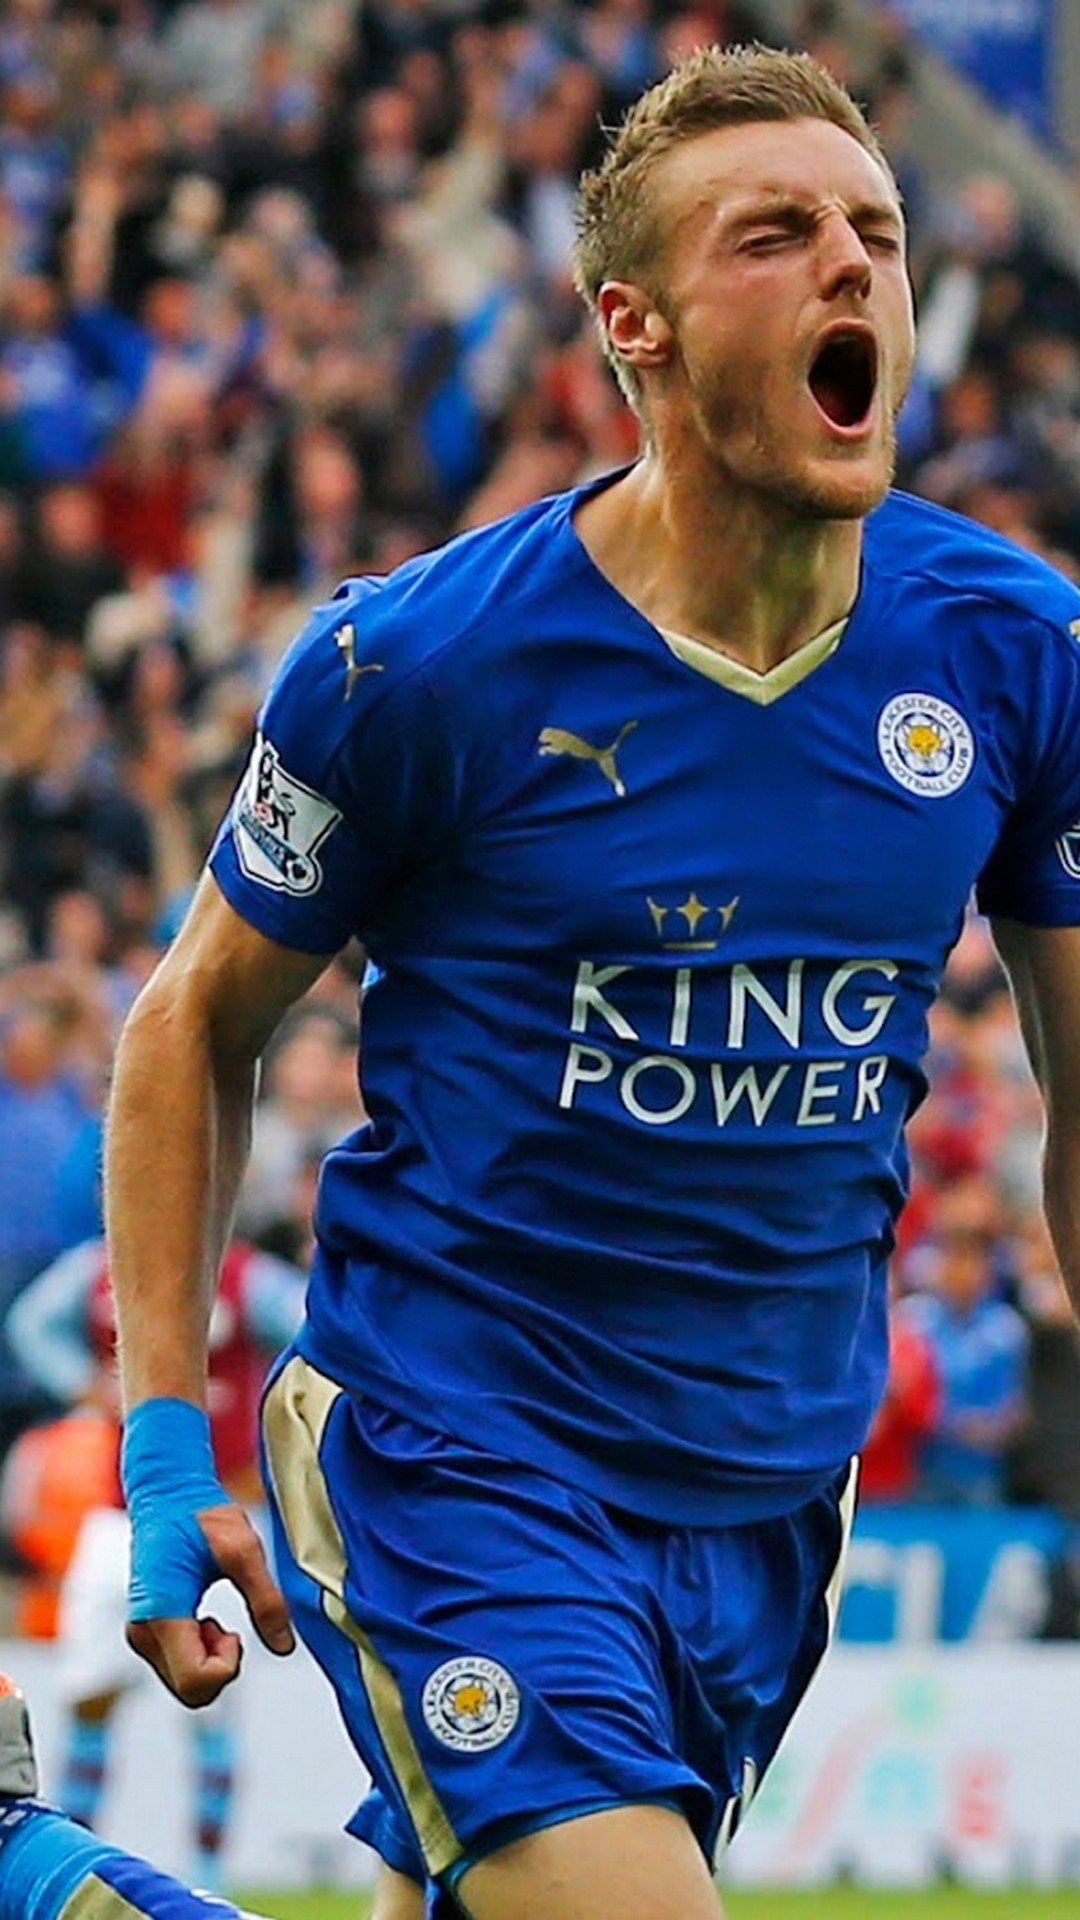 Jamie Vardy Wallpaper iPhone HD with high-resolution 1080x1920 pixel. You can use this wallpaper for your Desktop Computers, Mac Screensavers, Windows Backgrounds, iPhone Wallpapers, Tablet or Android Lock screen and another Mobile device